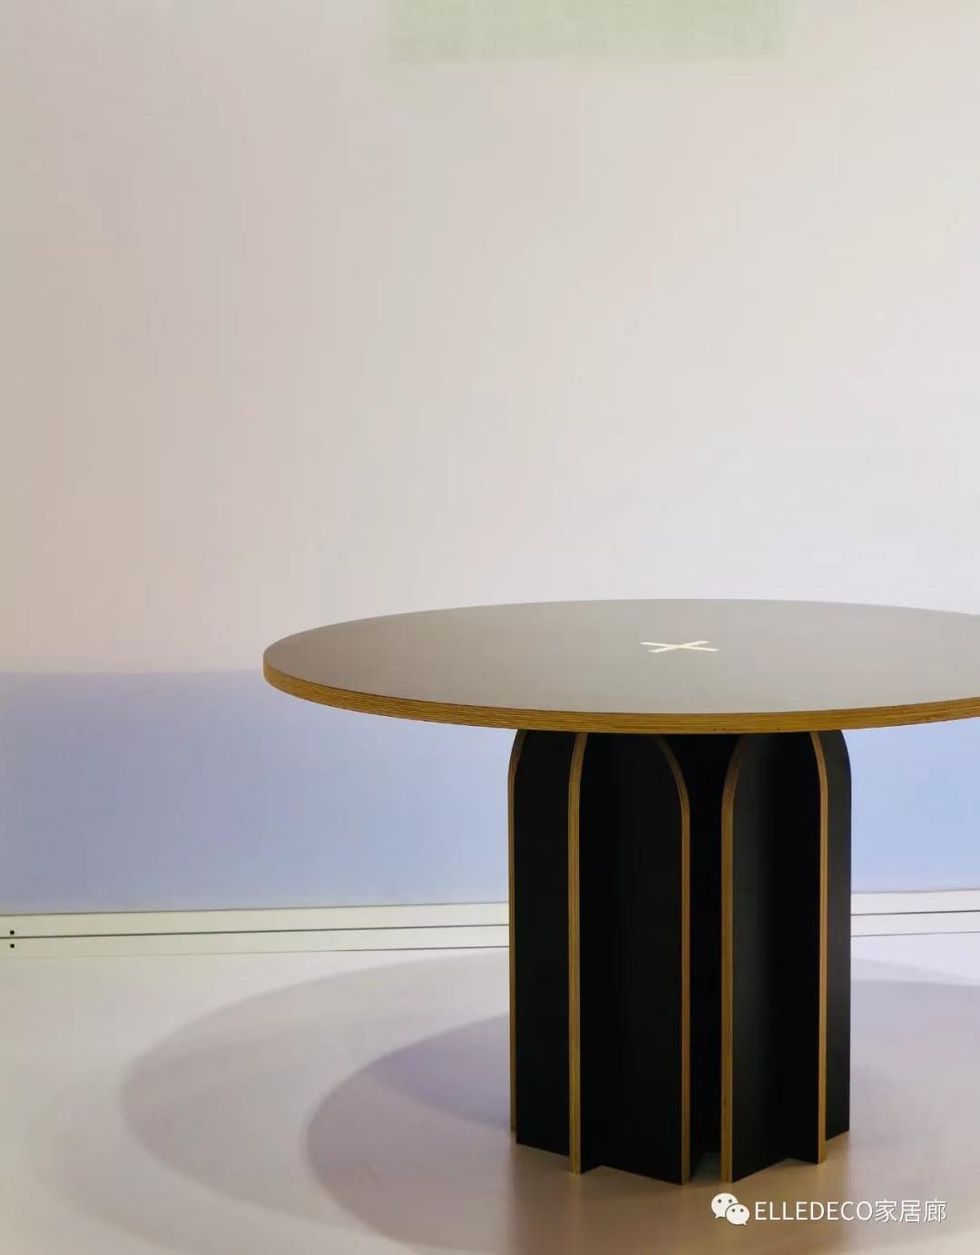 Table, Furniture, Design, Material property, Coffee table, Stool, 